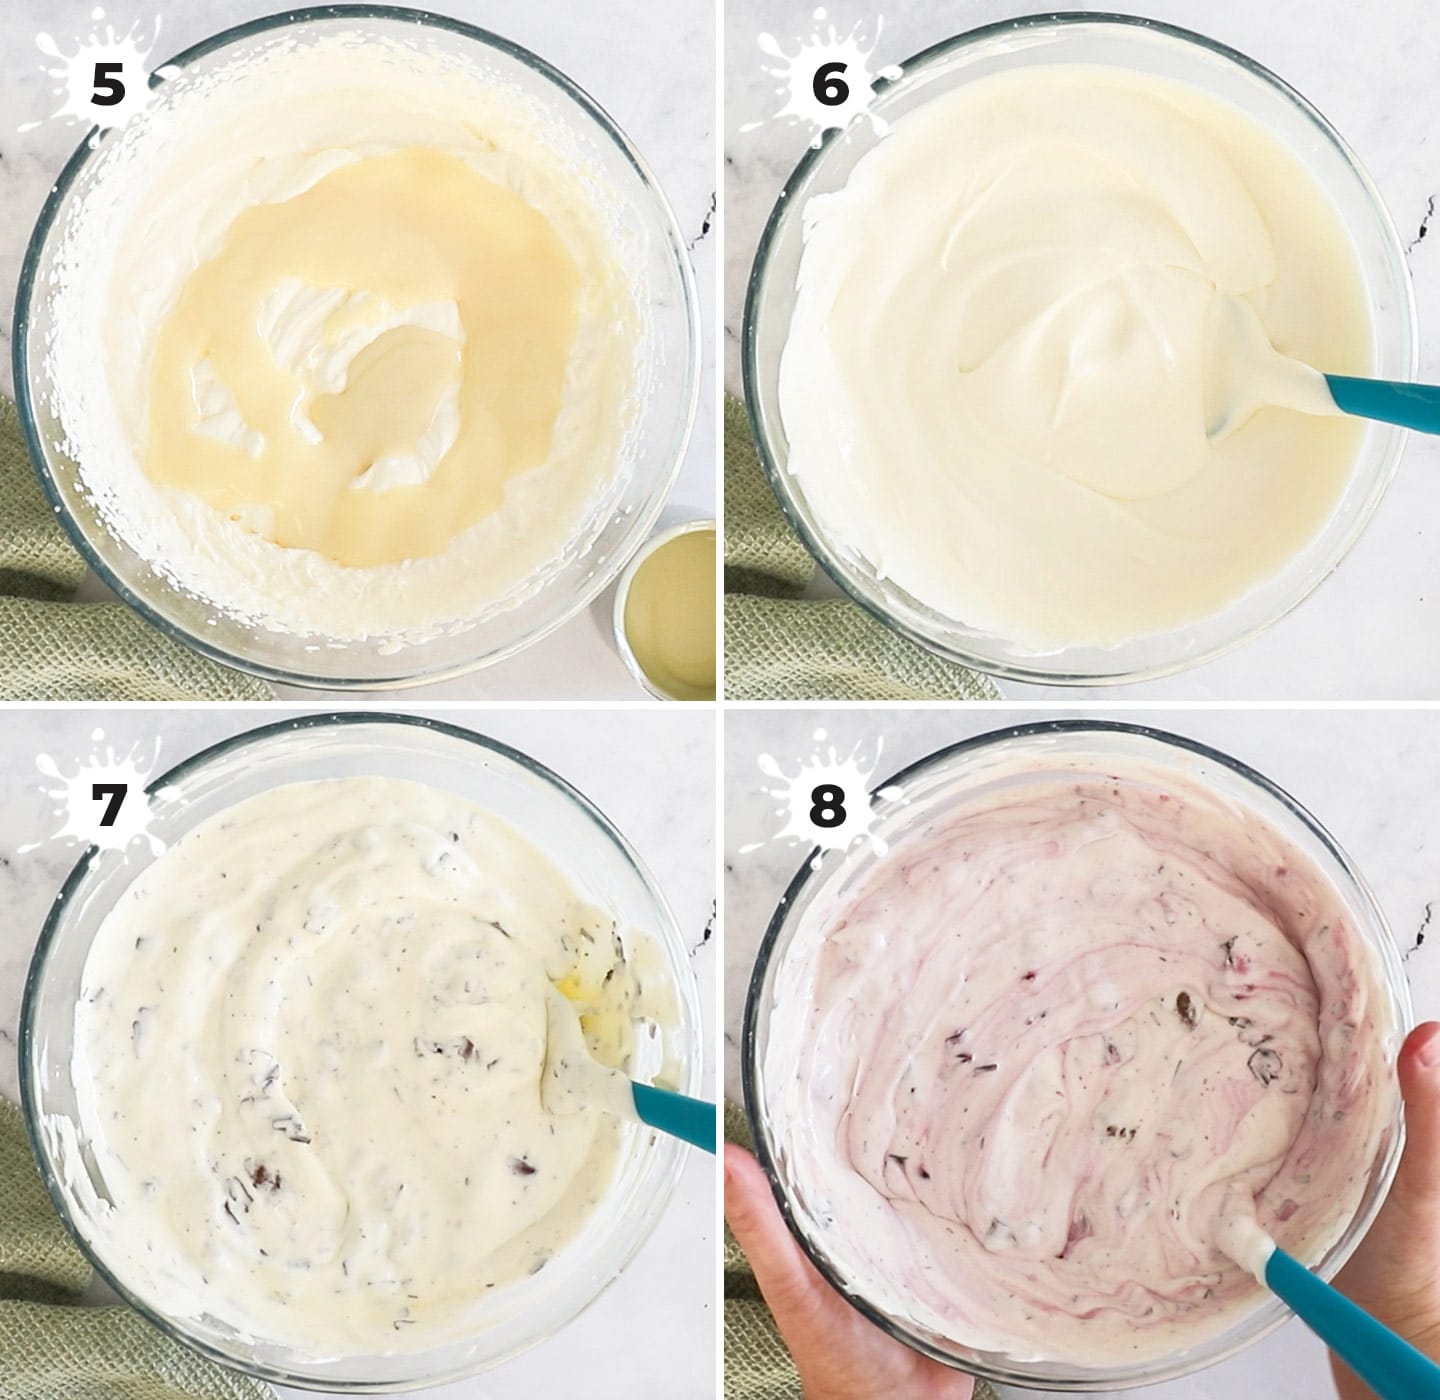 Showing how to mix the ice cream together.